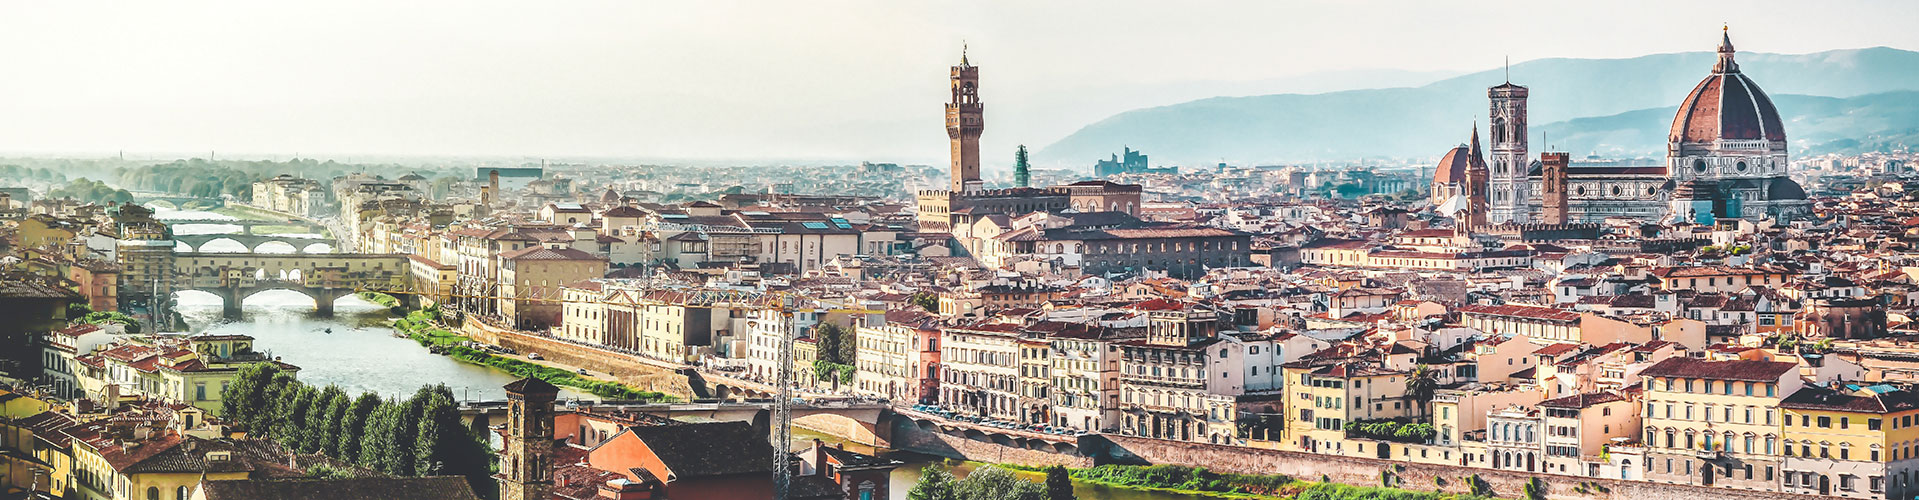 The city of Florence in Italy as seen from the Piazzale Michelangelo in Tuscany.